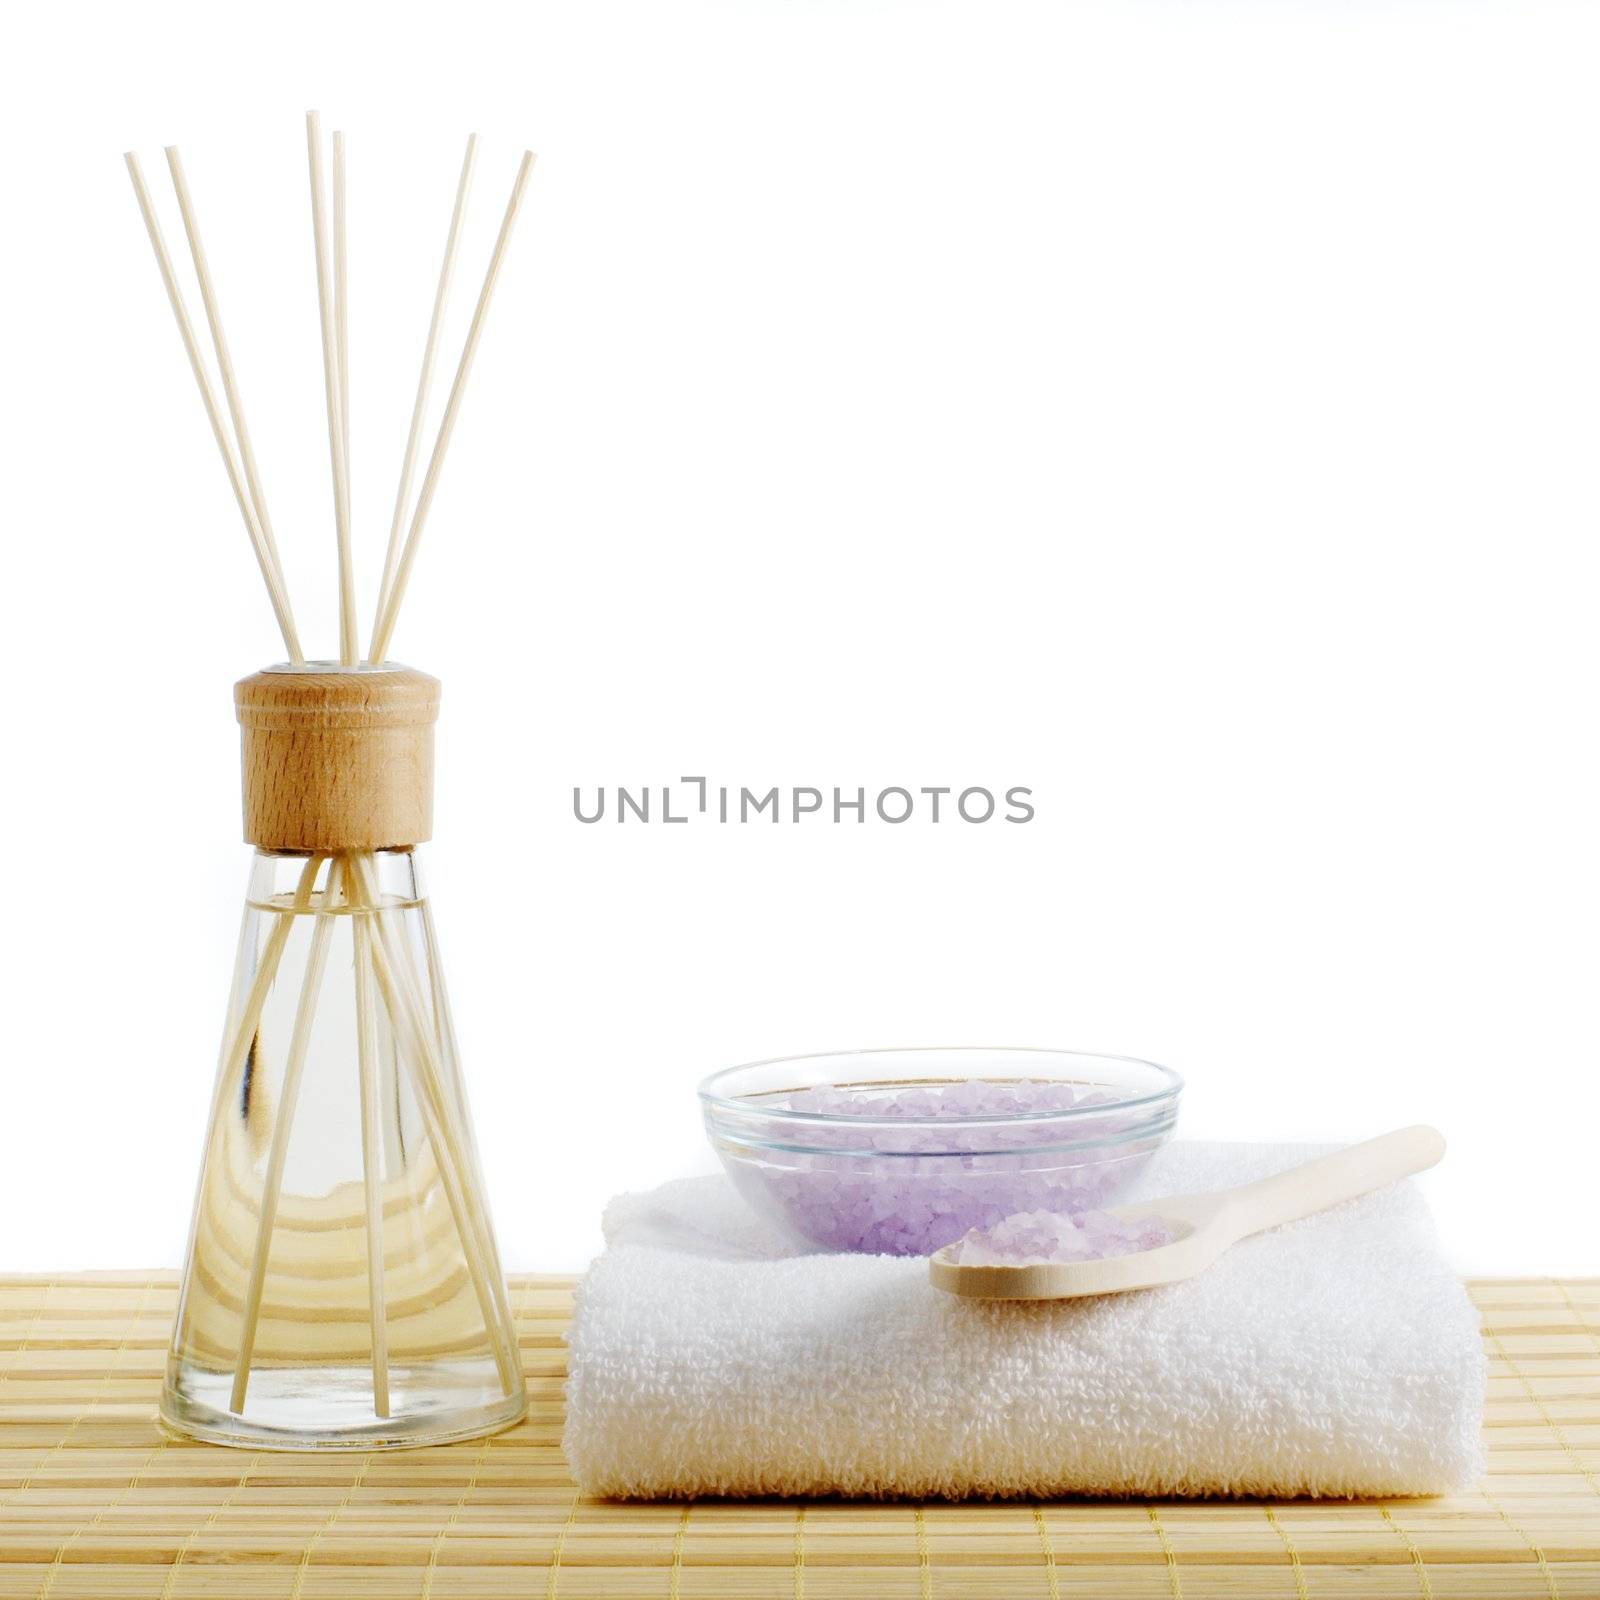 Spa scene on top of a bamboo mat and against a white background.